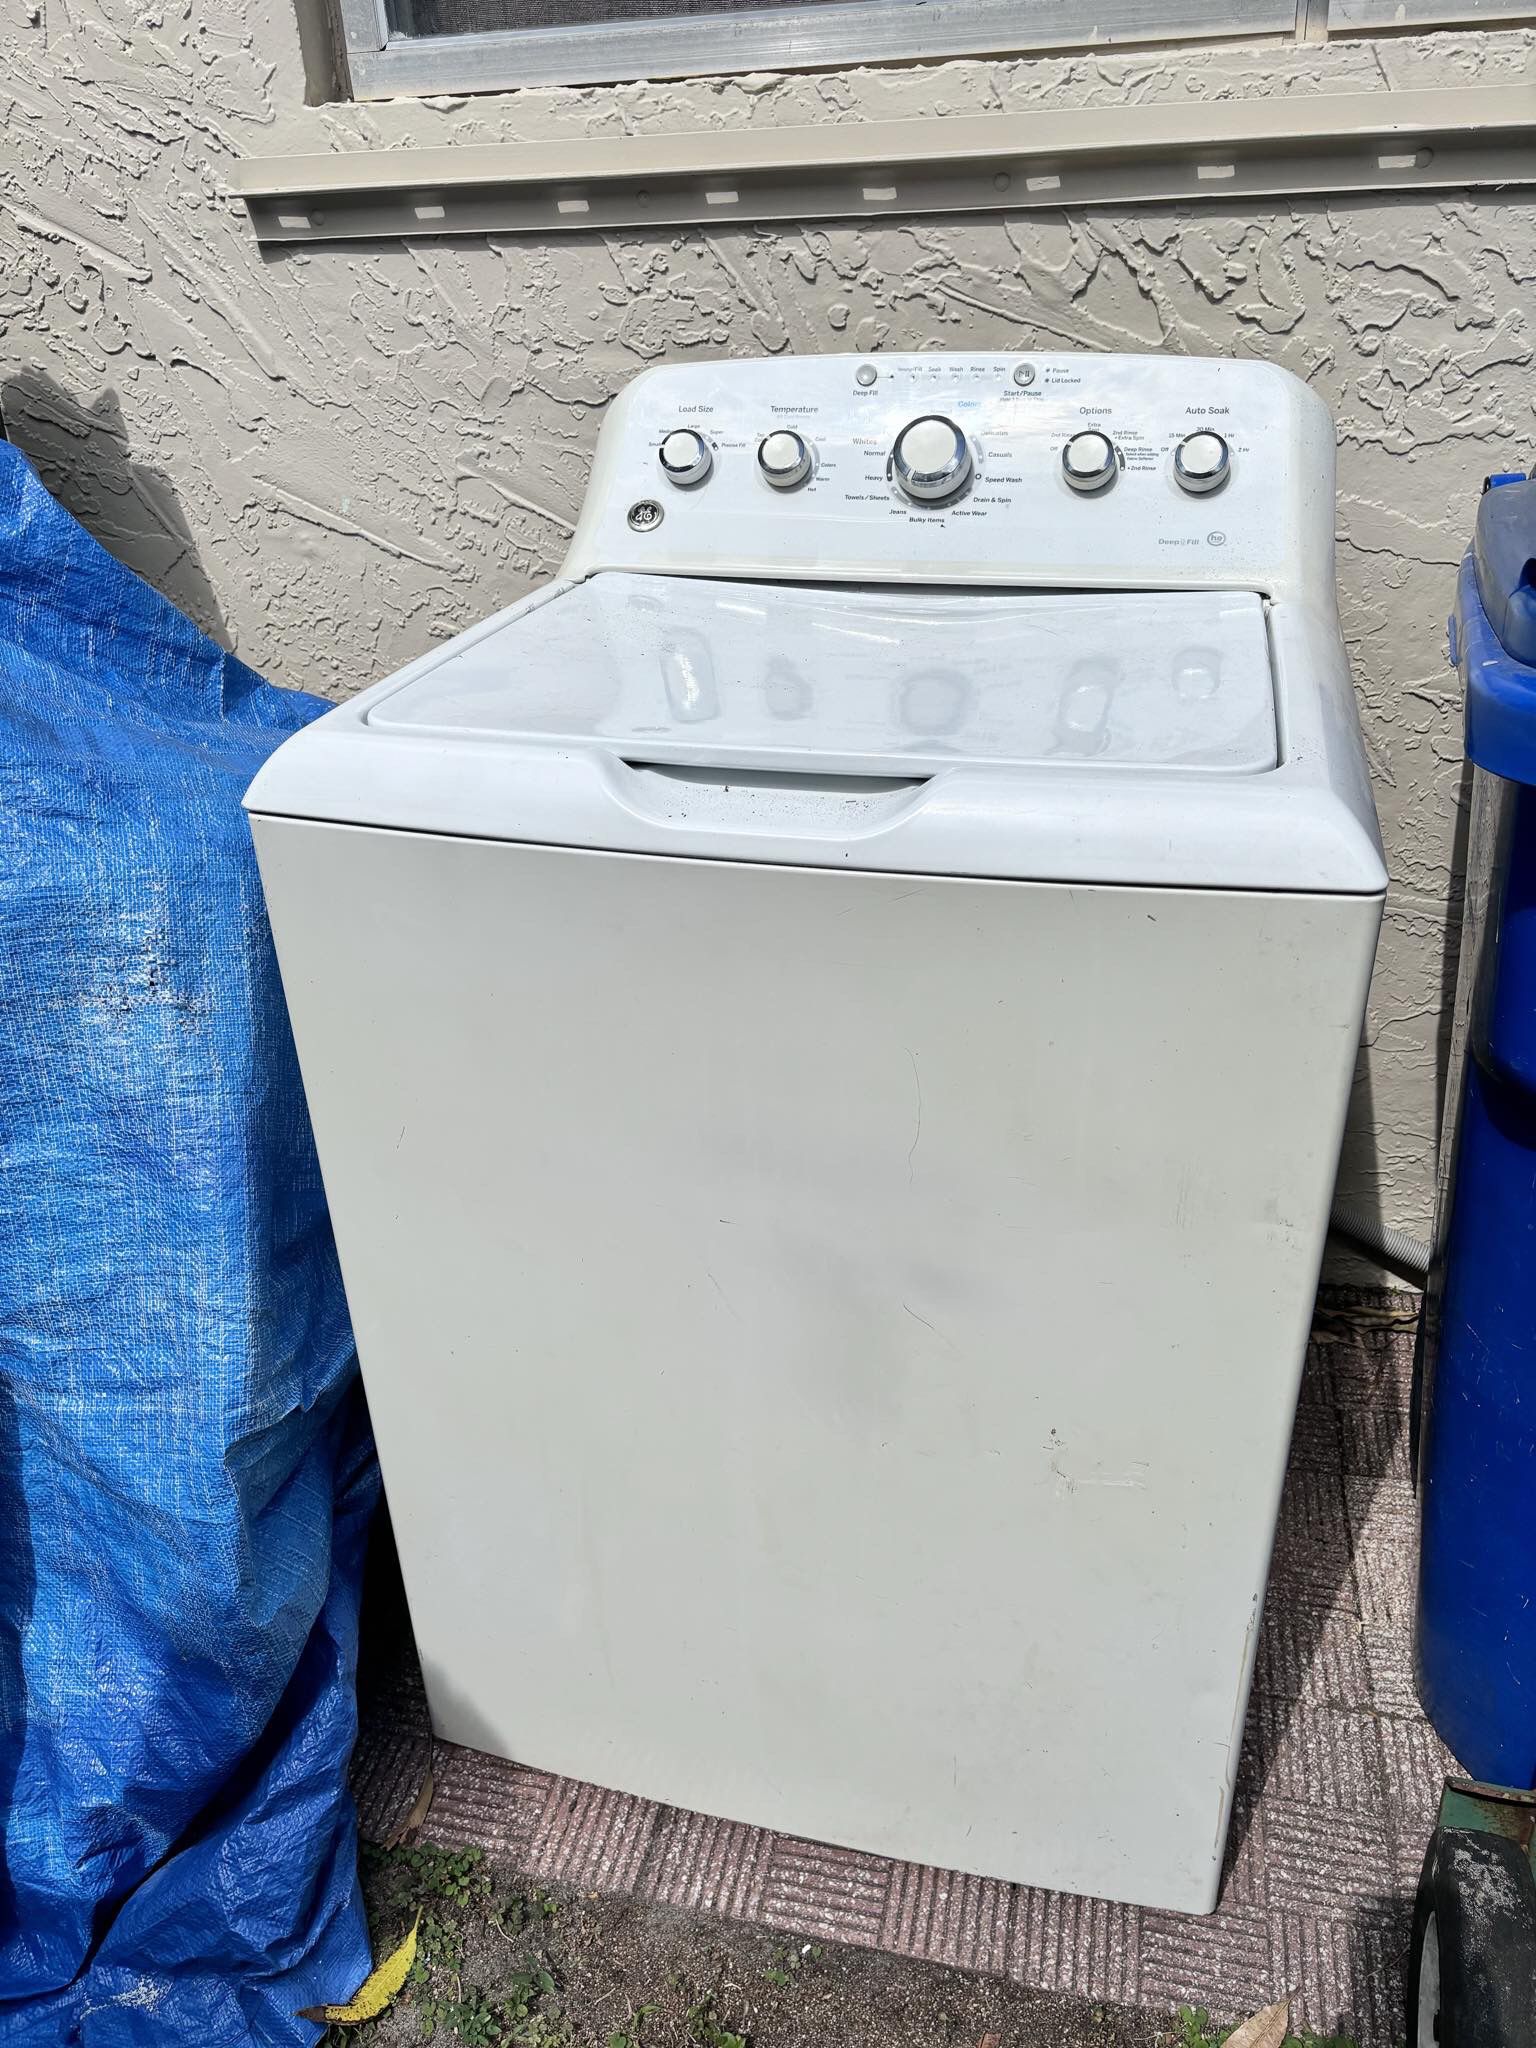 GE Washer $150